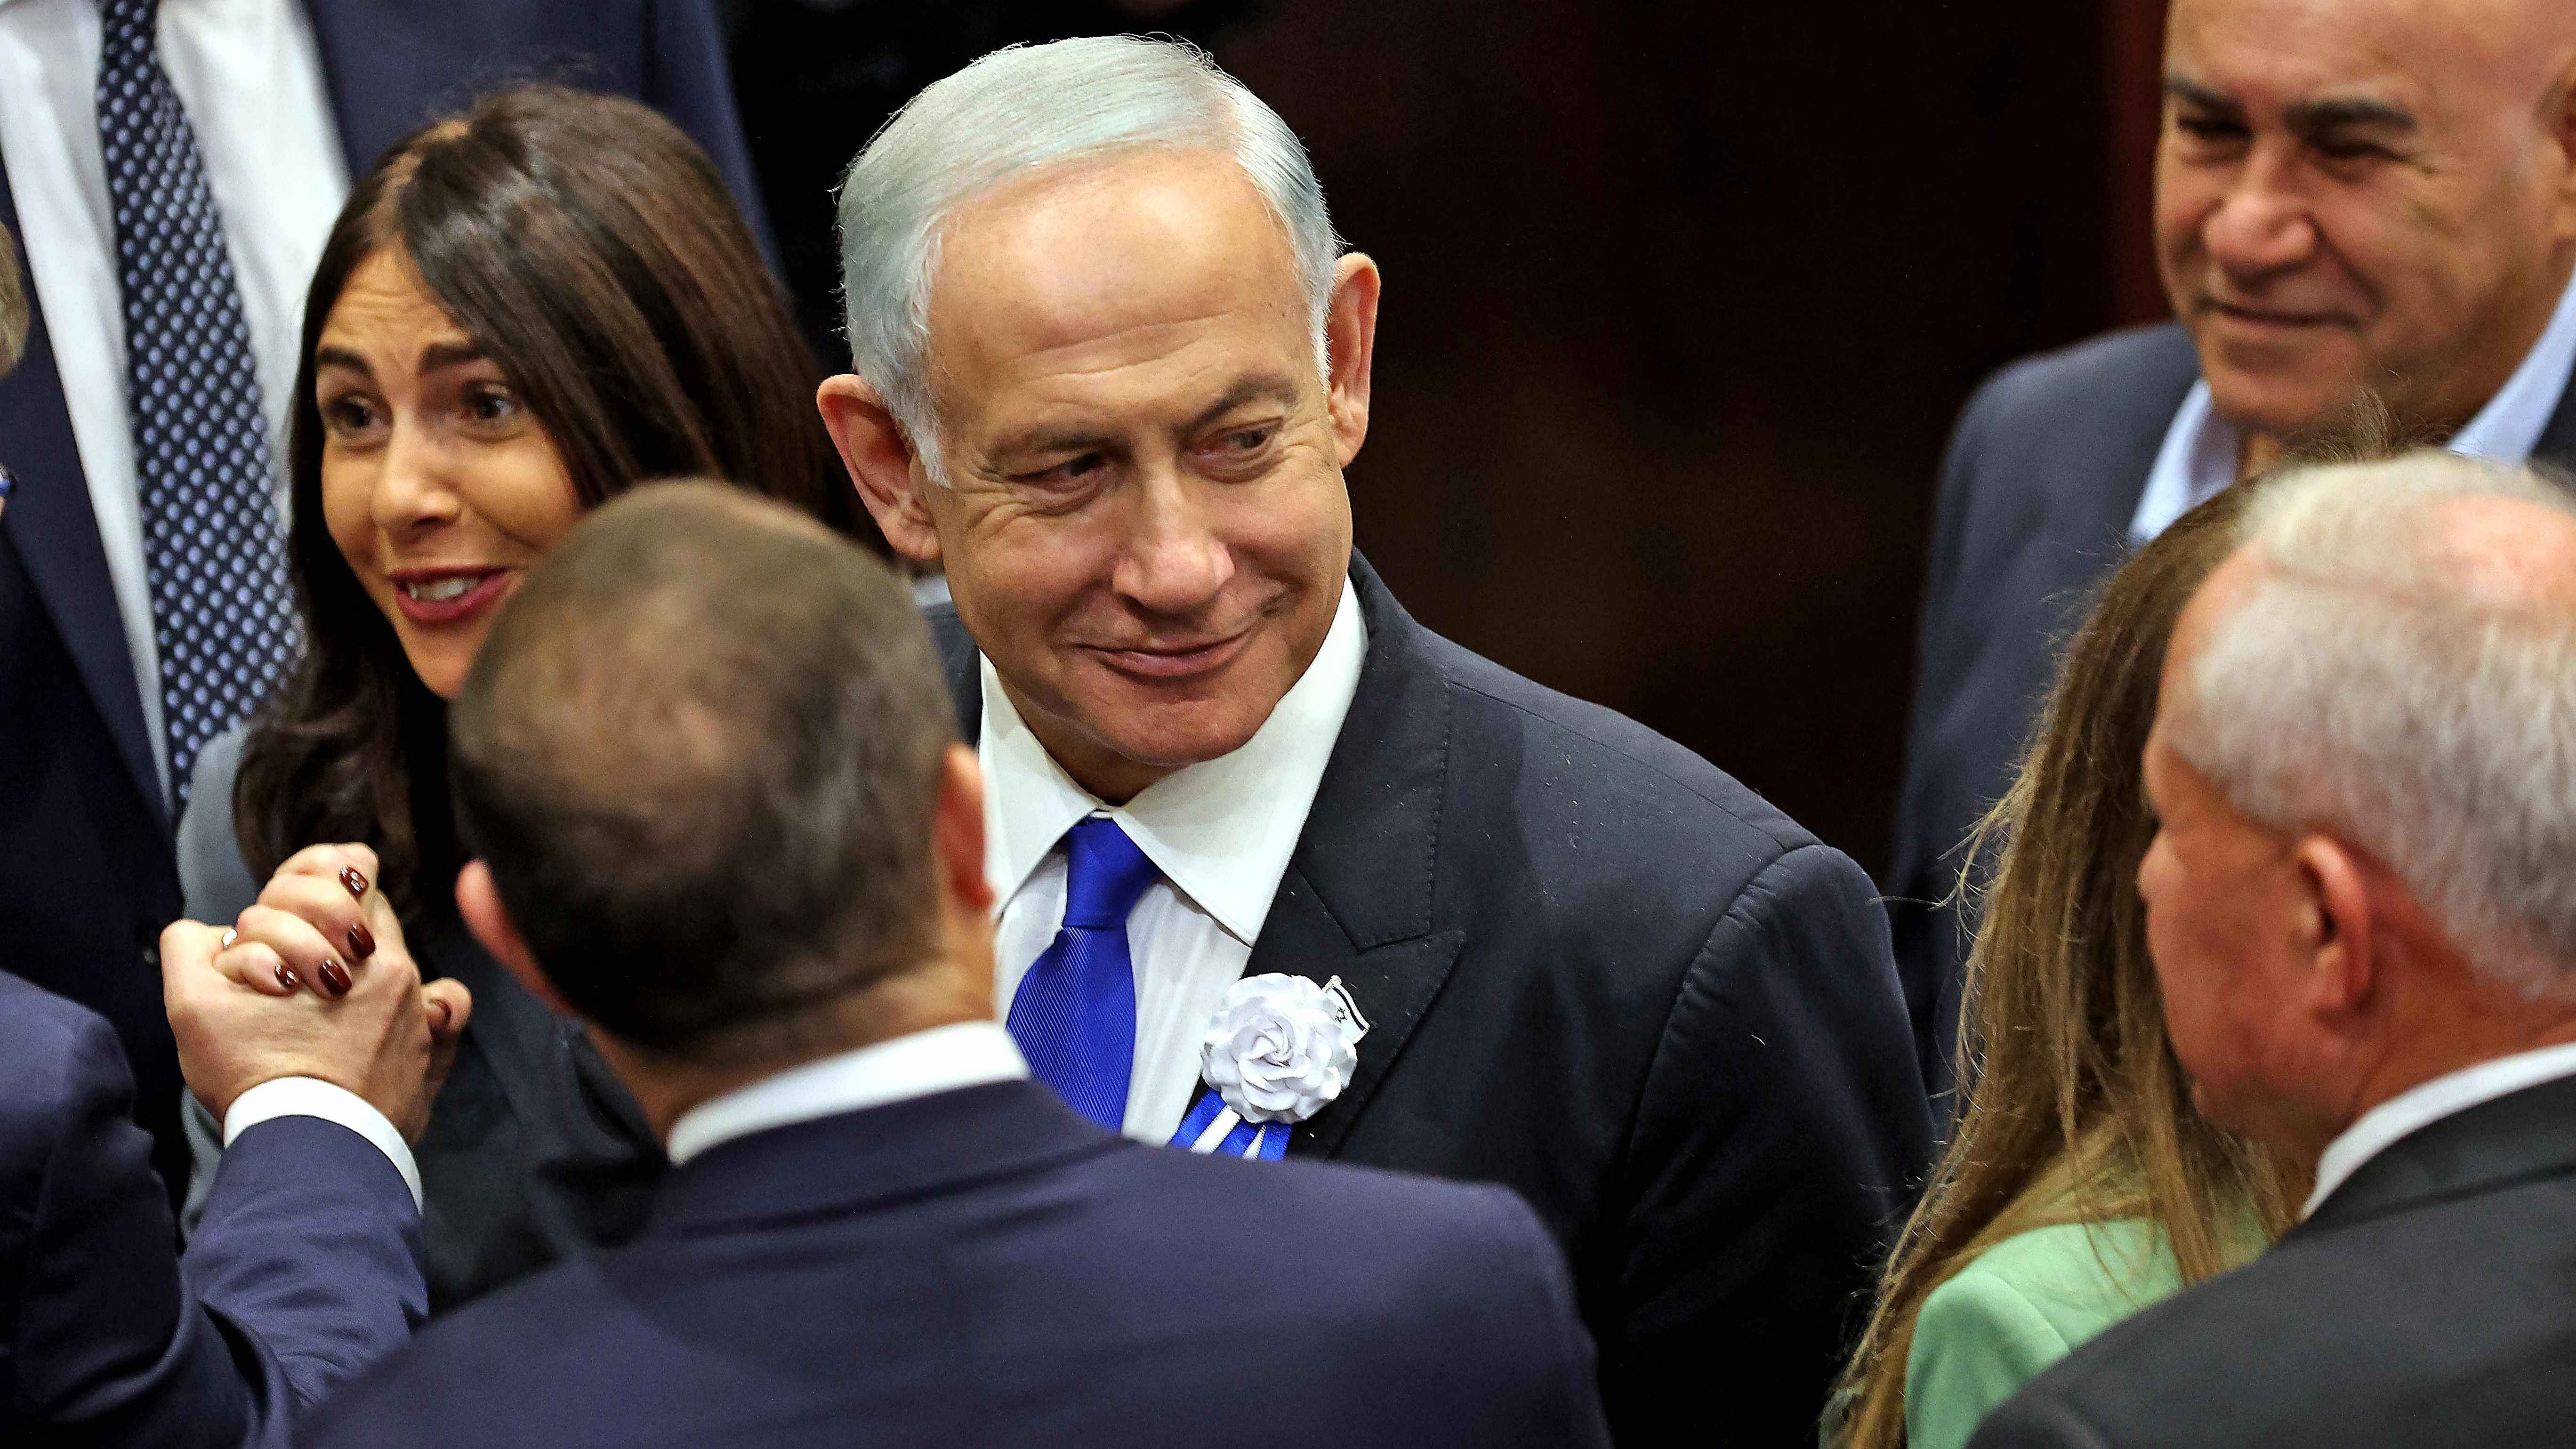 Incoming Israeli PM Netanyahu attends swearing in ceremony of the new government. Credit: AFP Photo